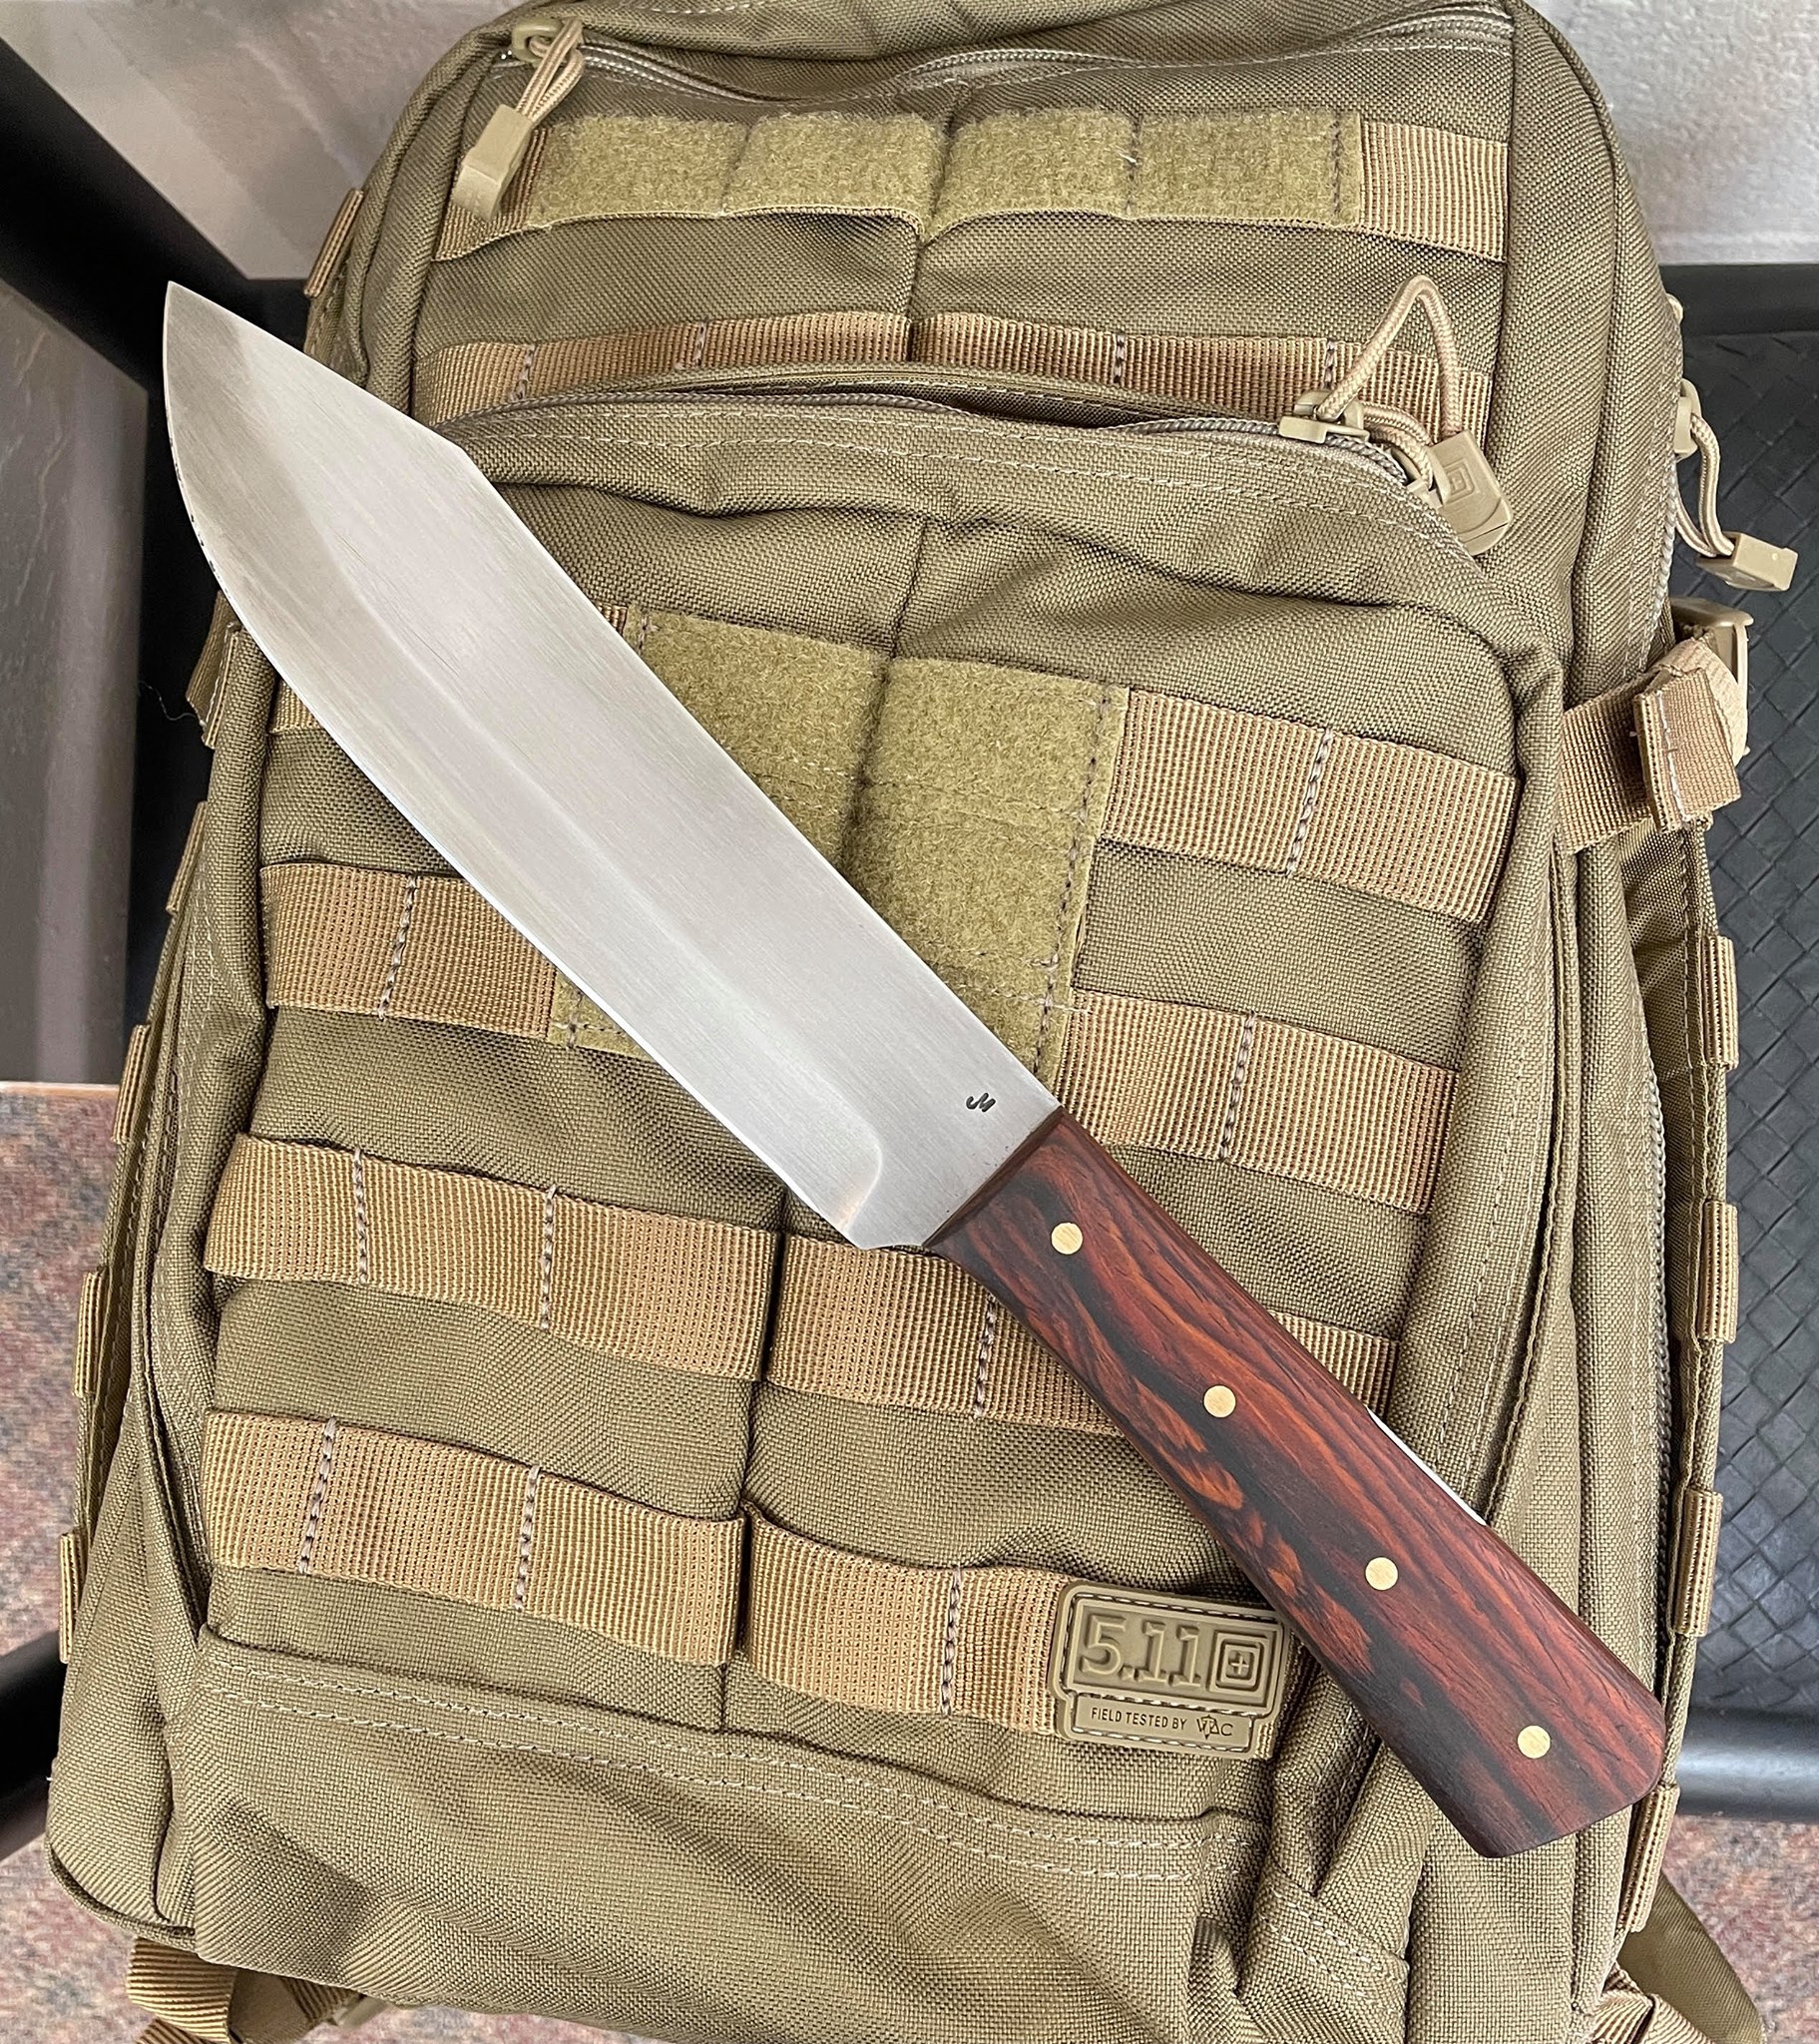 Knife and backpack from Quinn Knives and Backcountry Goods